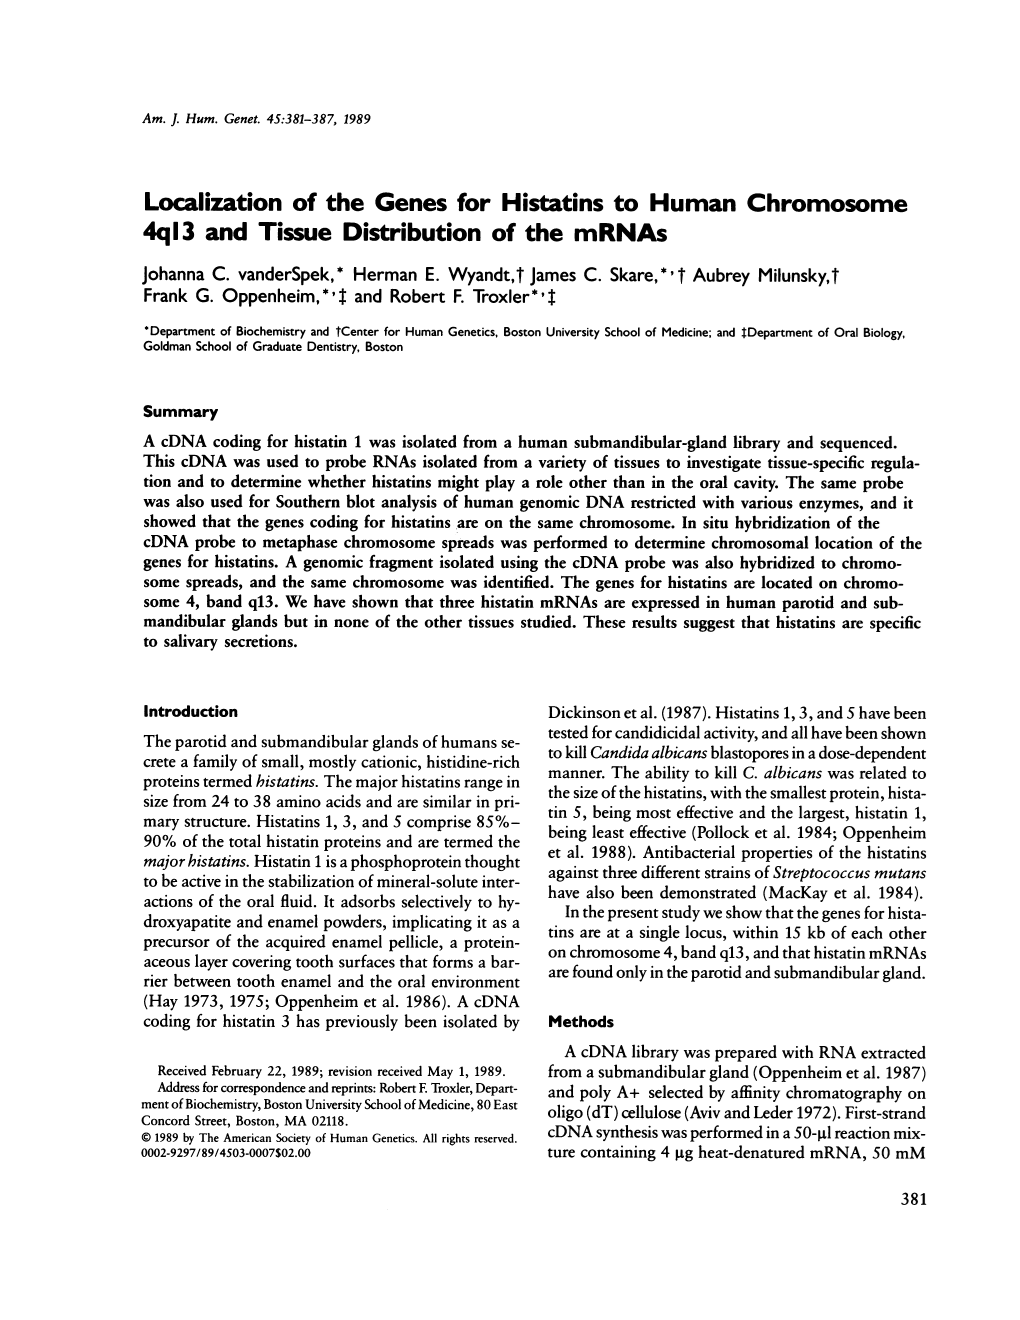 Localization of the Genes for Histatins to Human Chromosome 4Q13 and Tissue Distribution of the Mrnas Johanna C